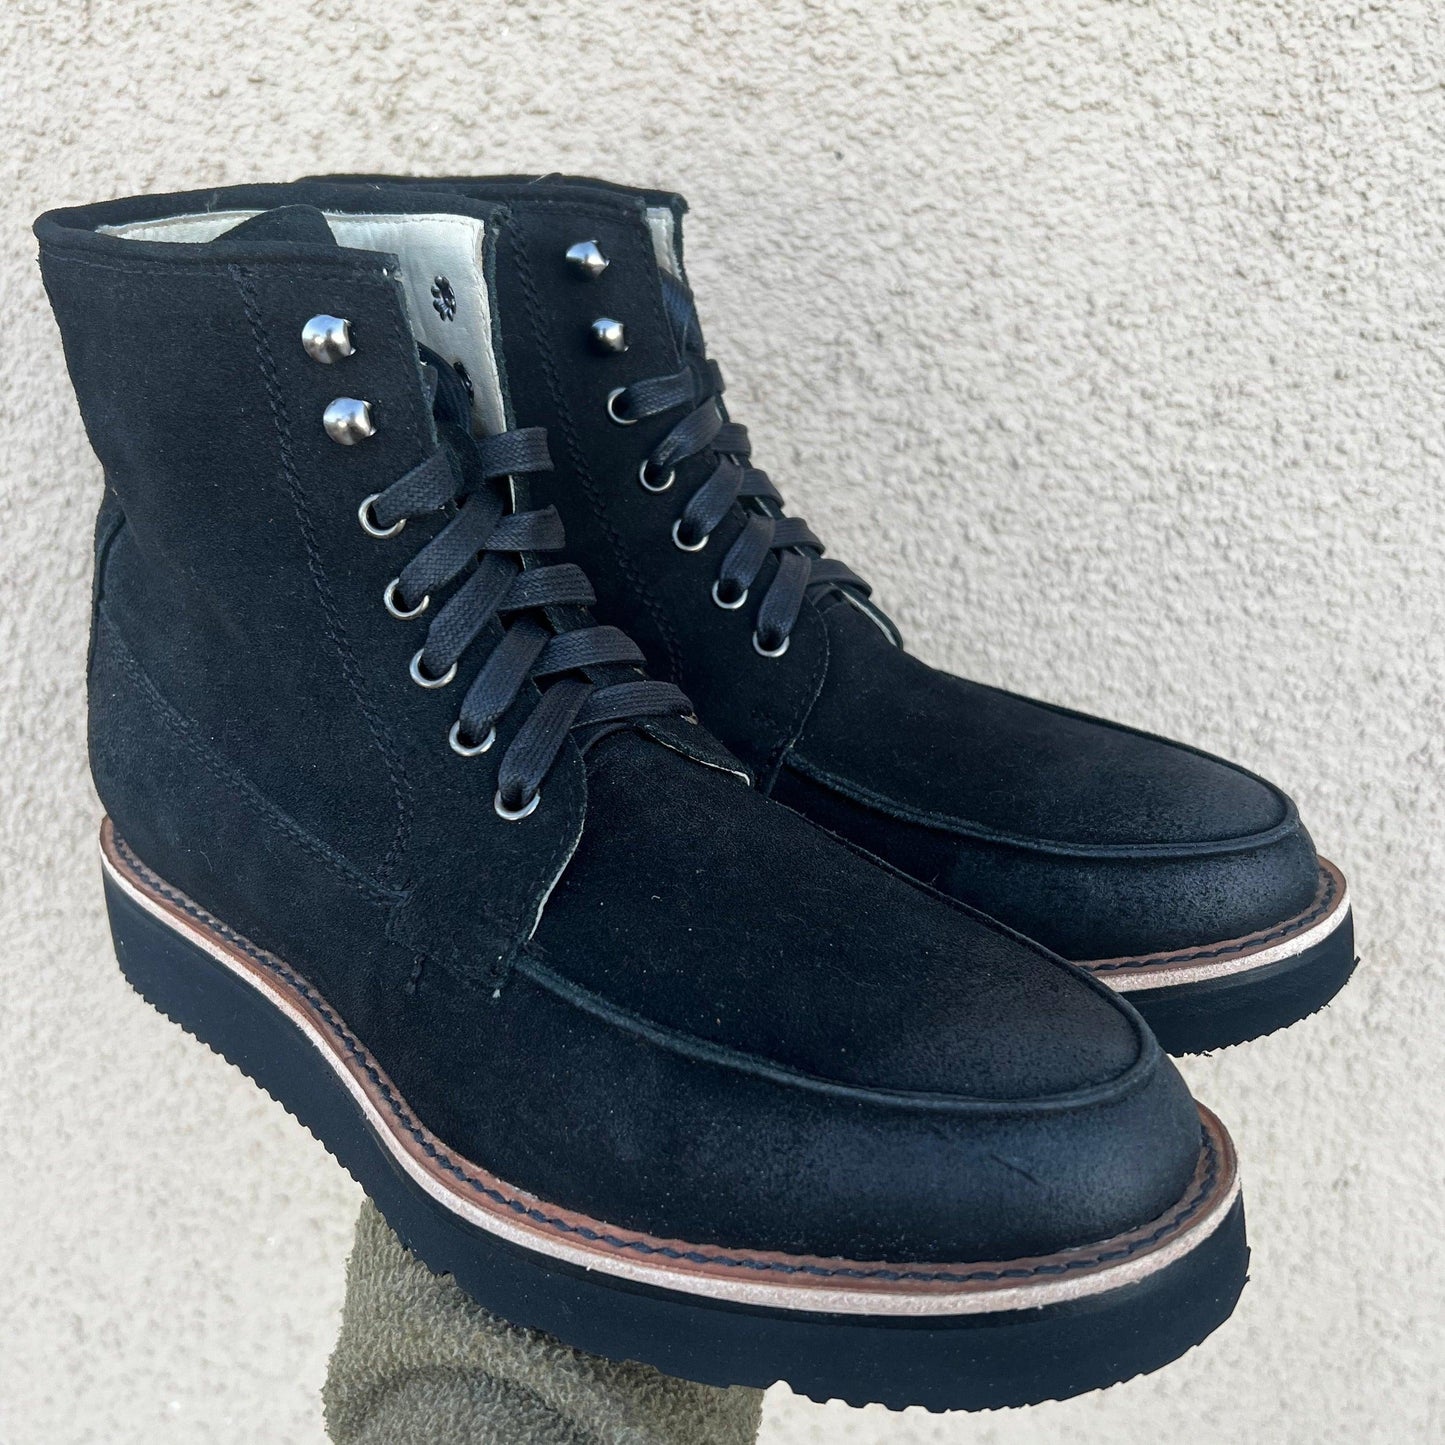 Waxed Suede Midnight Nomad Size 9.5 Item #0798 - DIEVIER